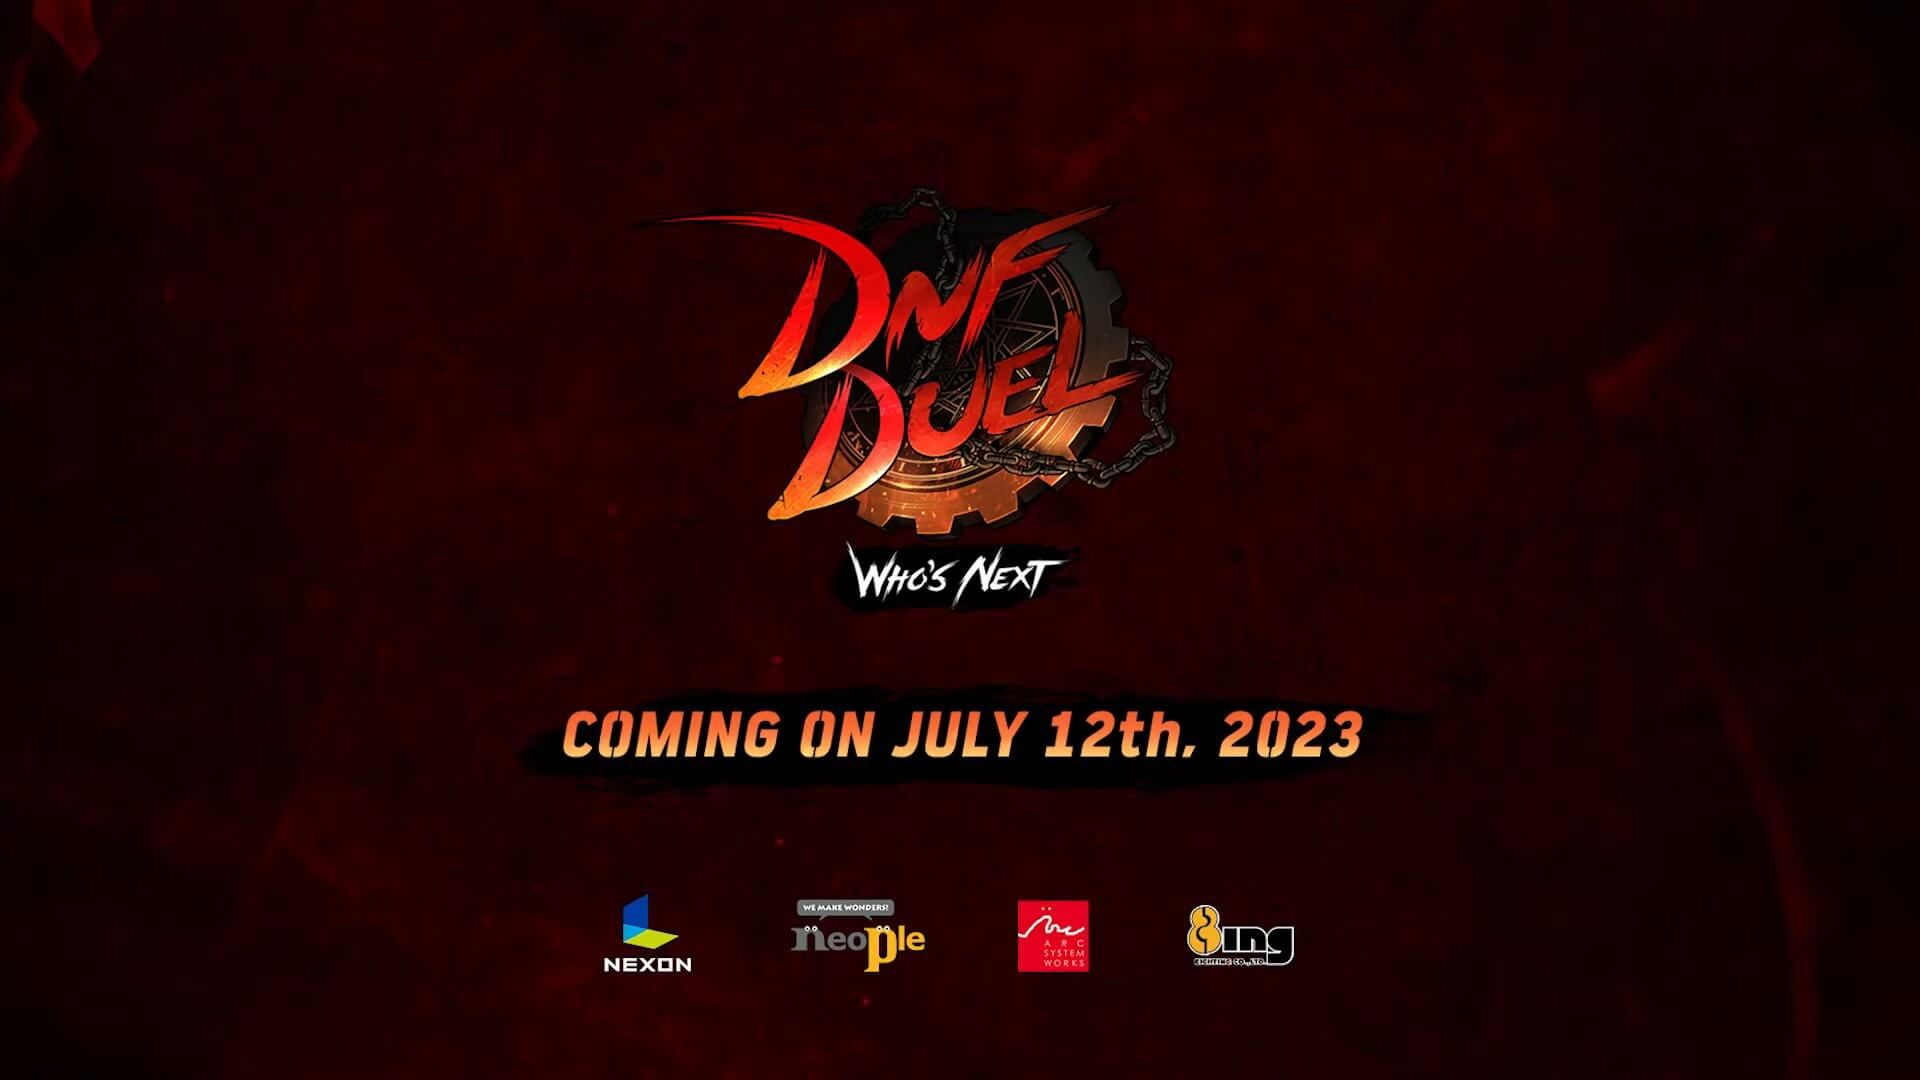 Spectre will join the DNF Duel Roster on July 12th